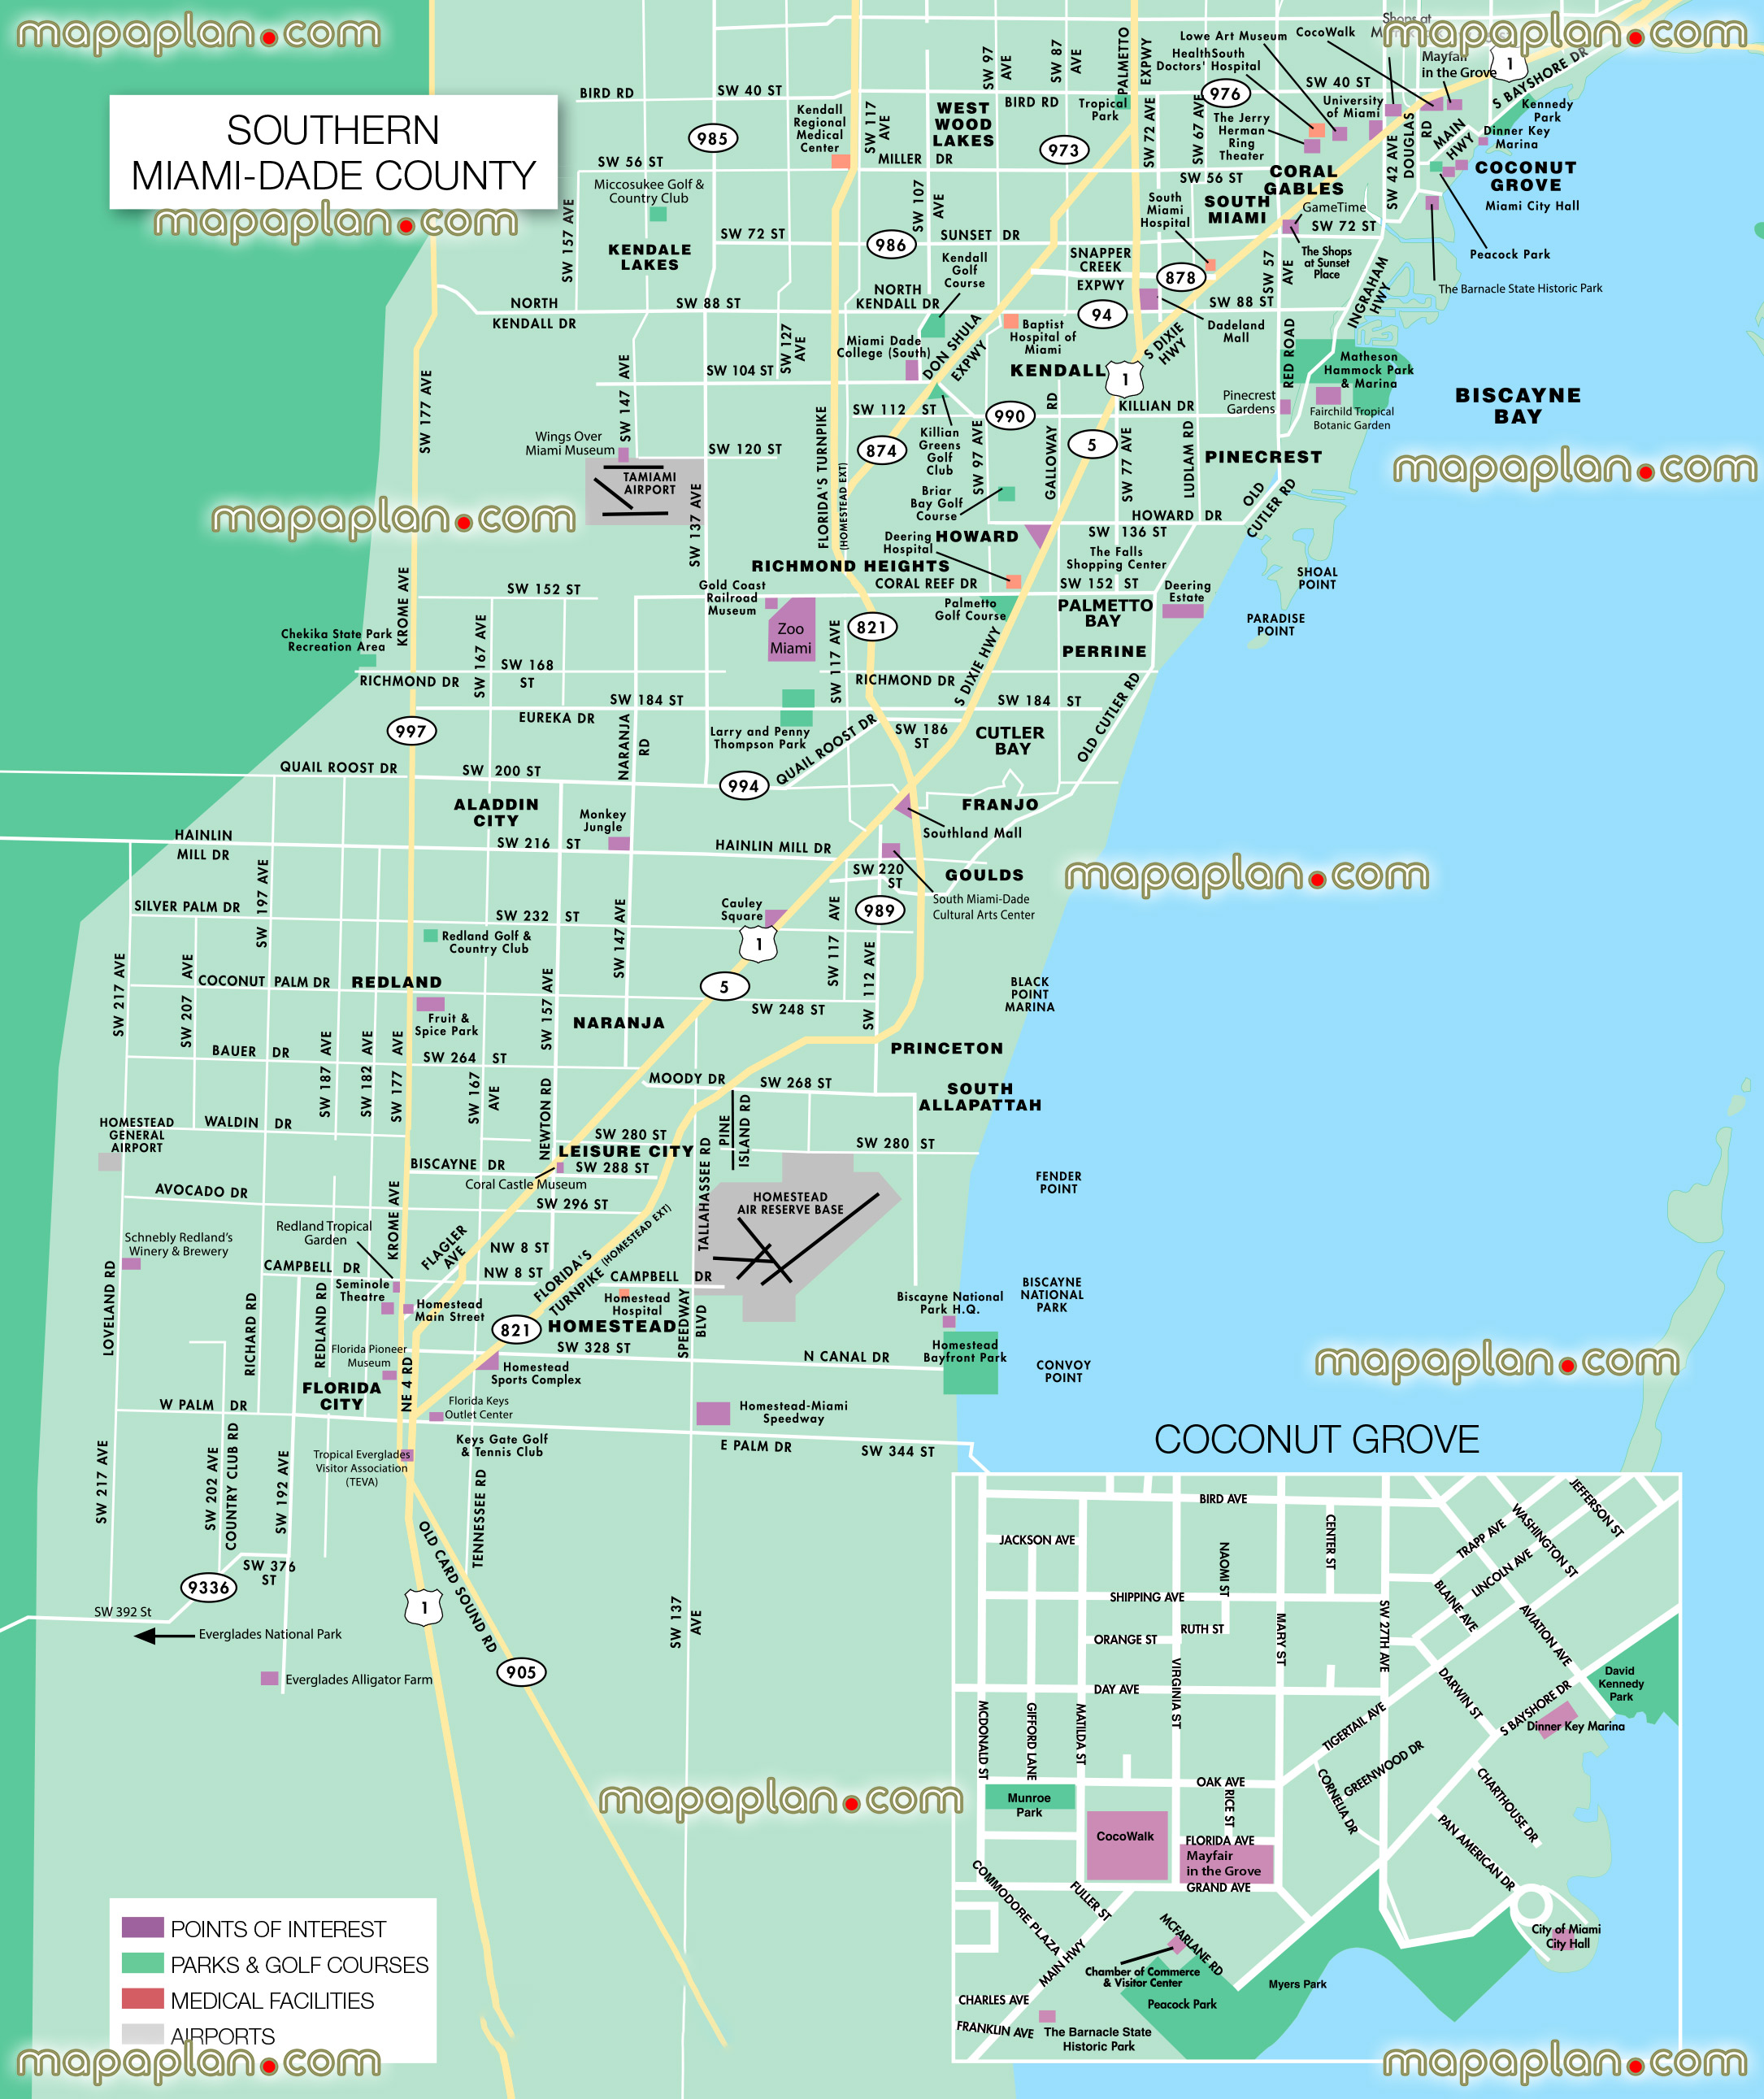 southern Miami dade county coconut grove central Miami free public transportation visitors 3d virtual interactive printable information plan download downtown destinations main points interest transport museums landmarks destinations